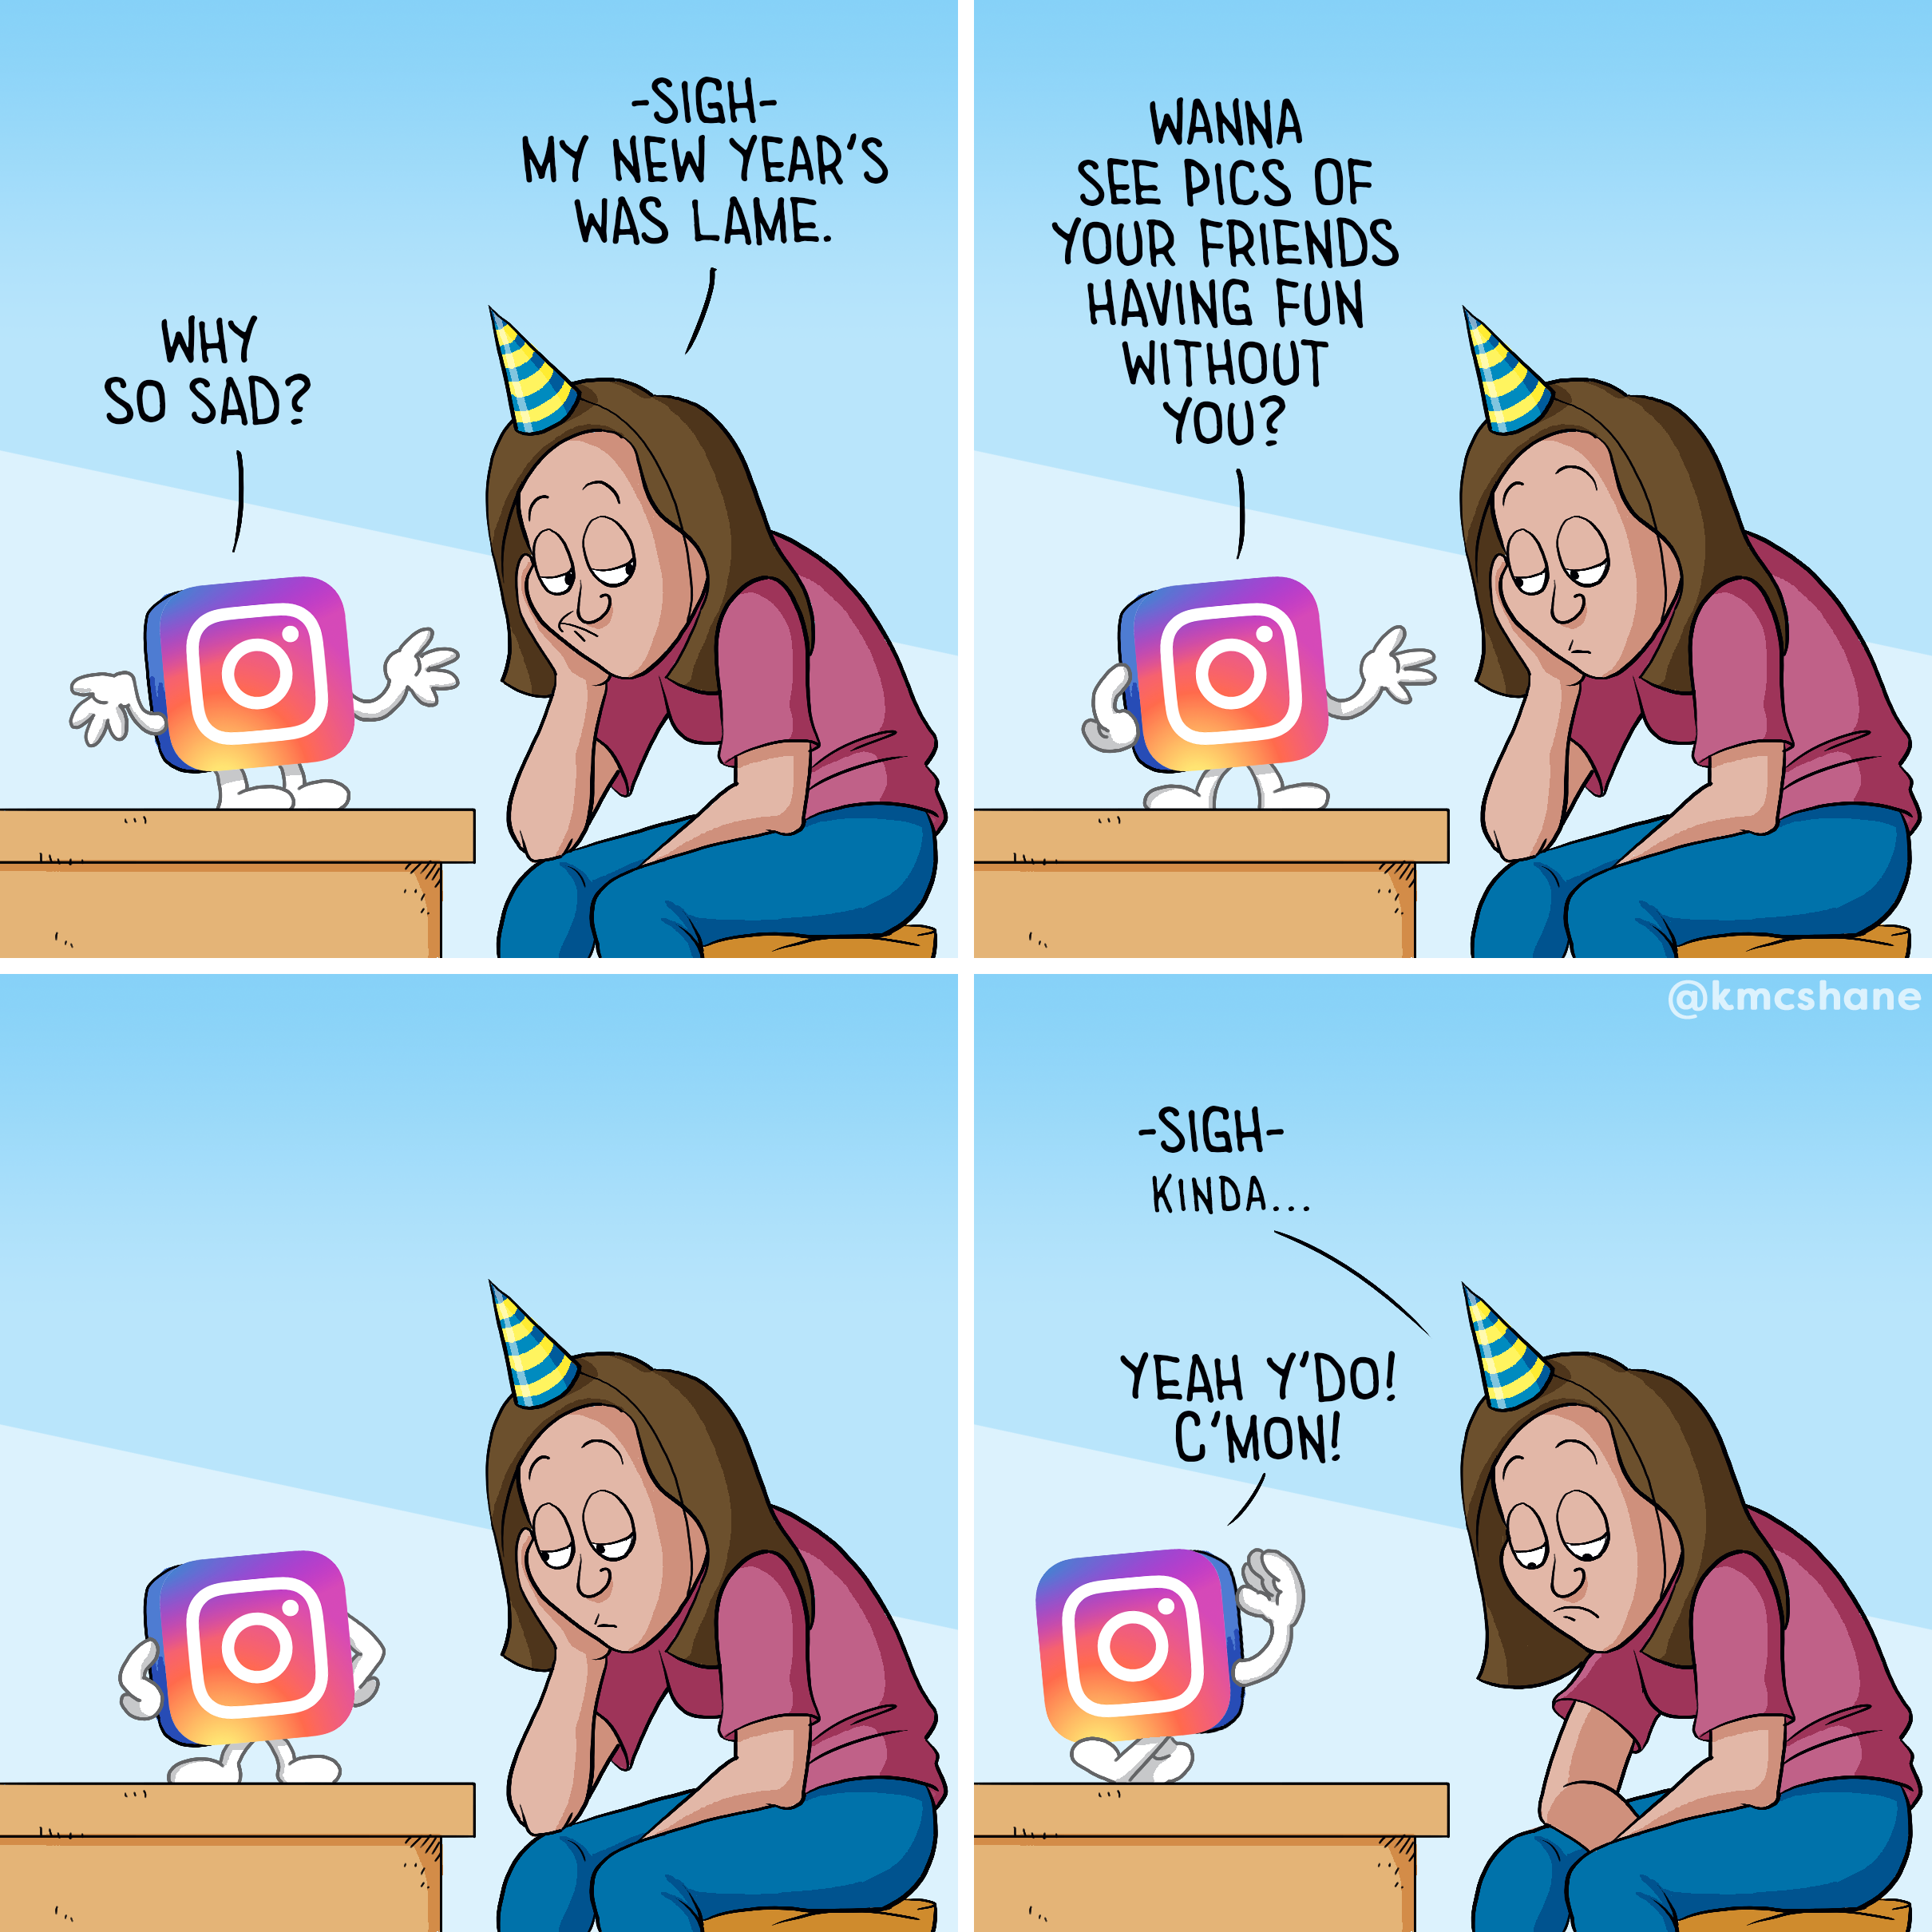 Instagram on New Year's Day